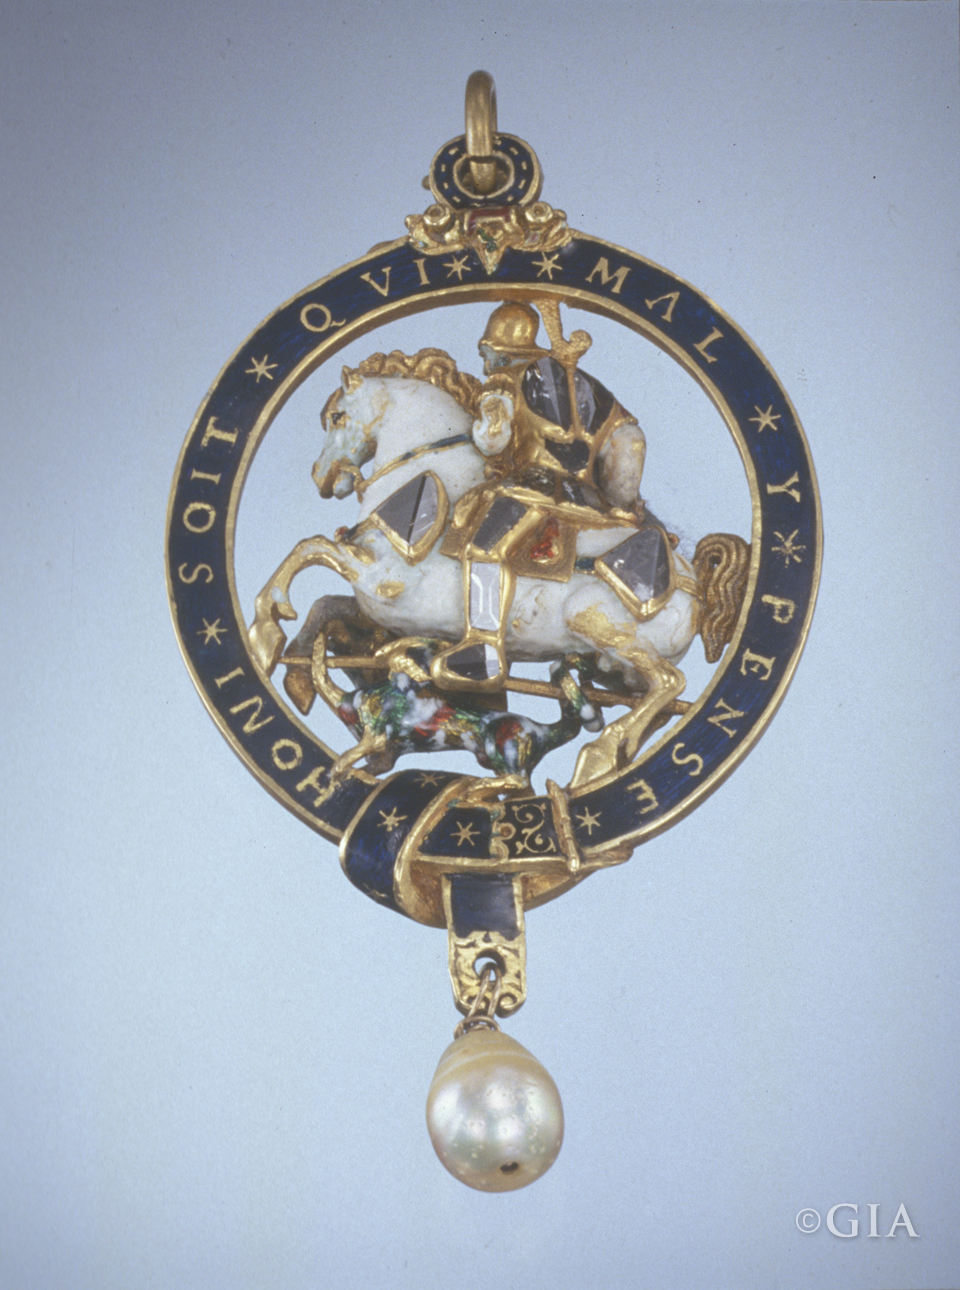 The Badge of the Order of the Garter, established in 1348 by Edward III of England, is still awarded to those who have served the Sovereign or contributed to public life . Your princely deeds could win you this special prize. Courtesy of S. J. Phillips, Ltd., London.